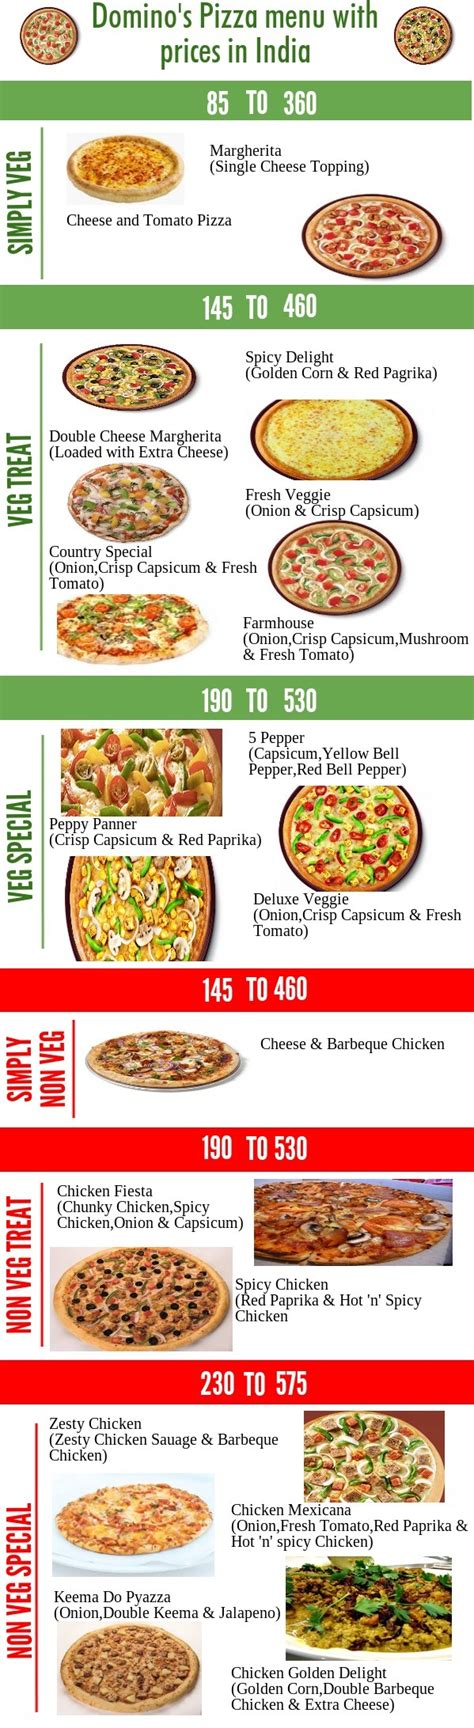 Get A Complete List Of Dominos Pizza With Prices In India Sagmart